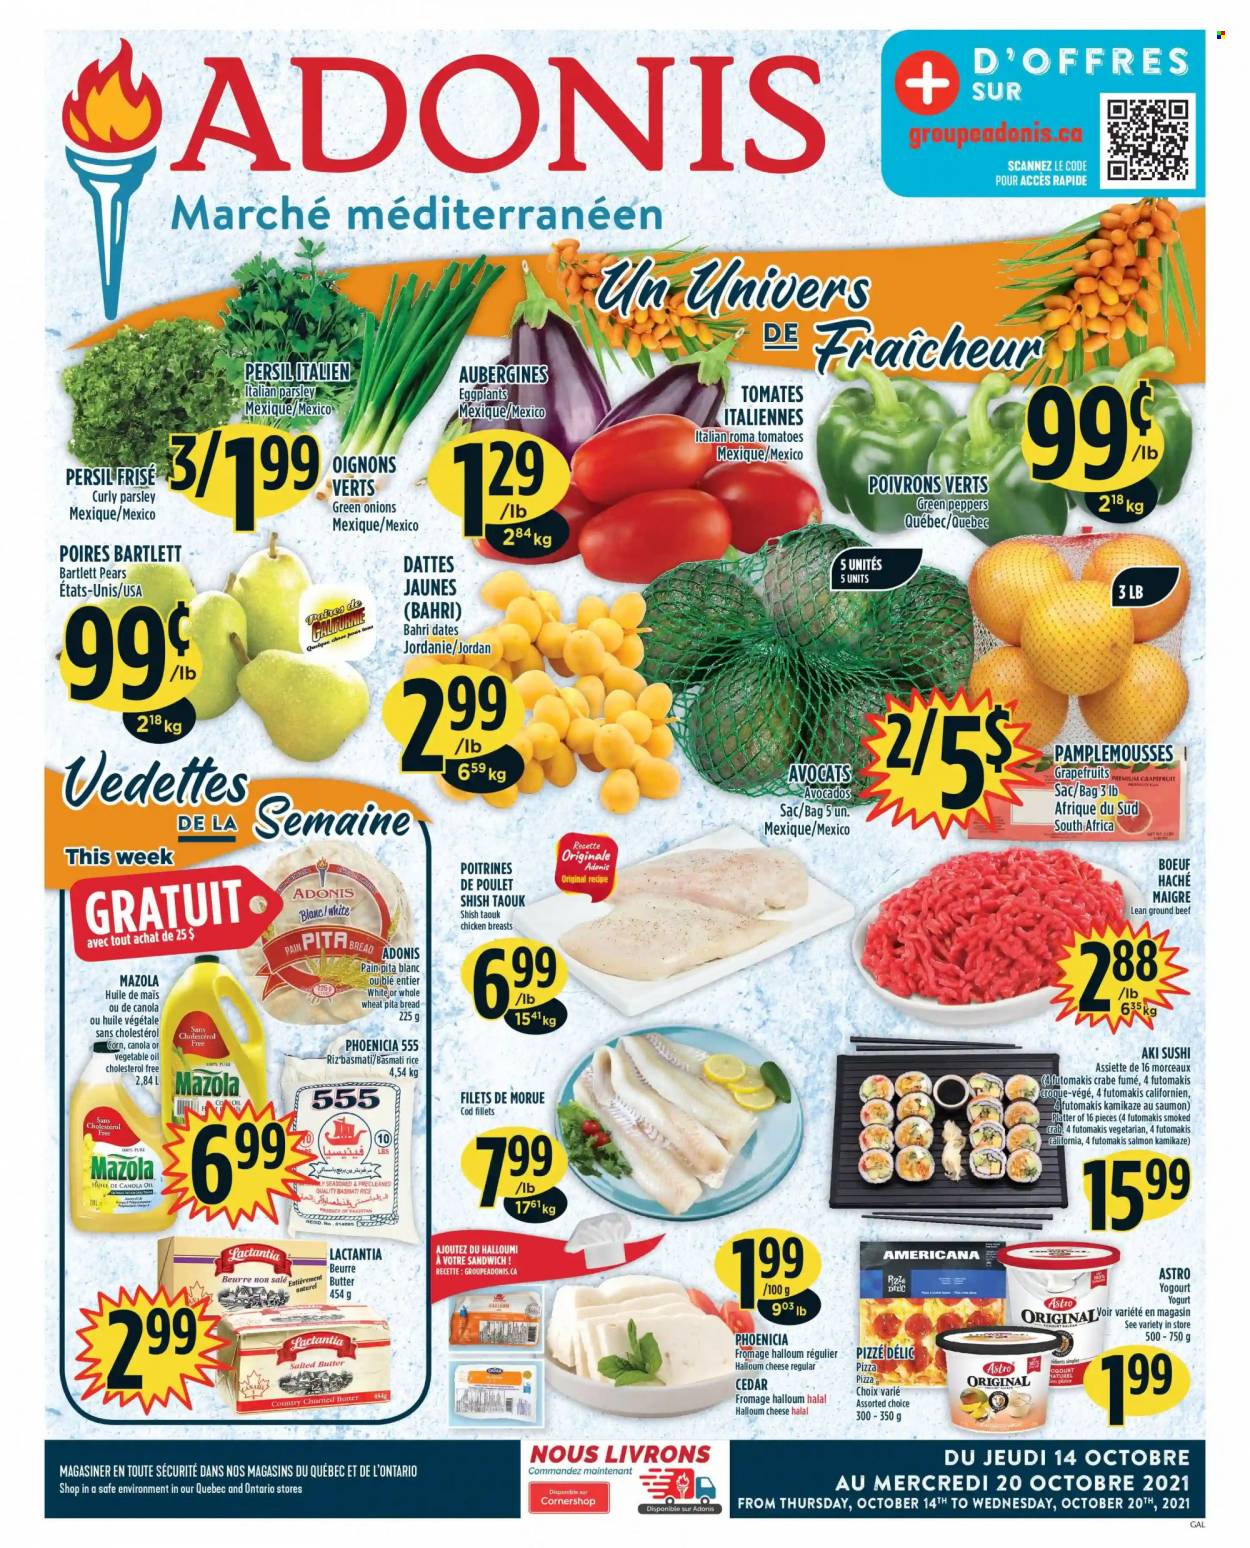 thumbnail - Adonis Flyer - October 14, 2021 - October 20, 2021 - Sales products - bread, pita, corn, parsley, eggplant, avocado, Bartlett pears, grapefruits, pears, cod, salmon, crab, pizza, sandwich, halloumi, yoghurt, butter, salted butter, basmati rice, rice, canola oil, oil, chicken breasts, beef meat, ground beef, Persil, bag. Page 1.